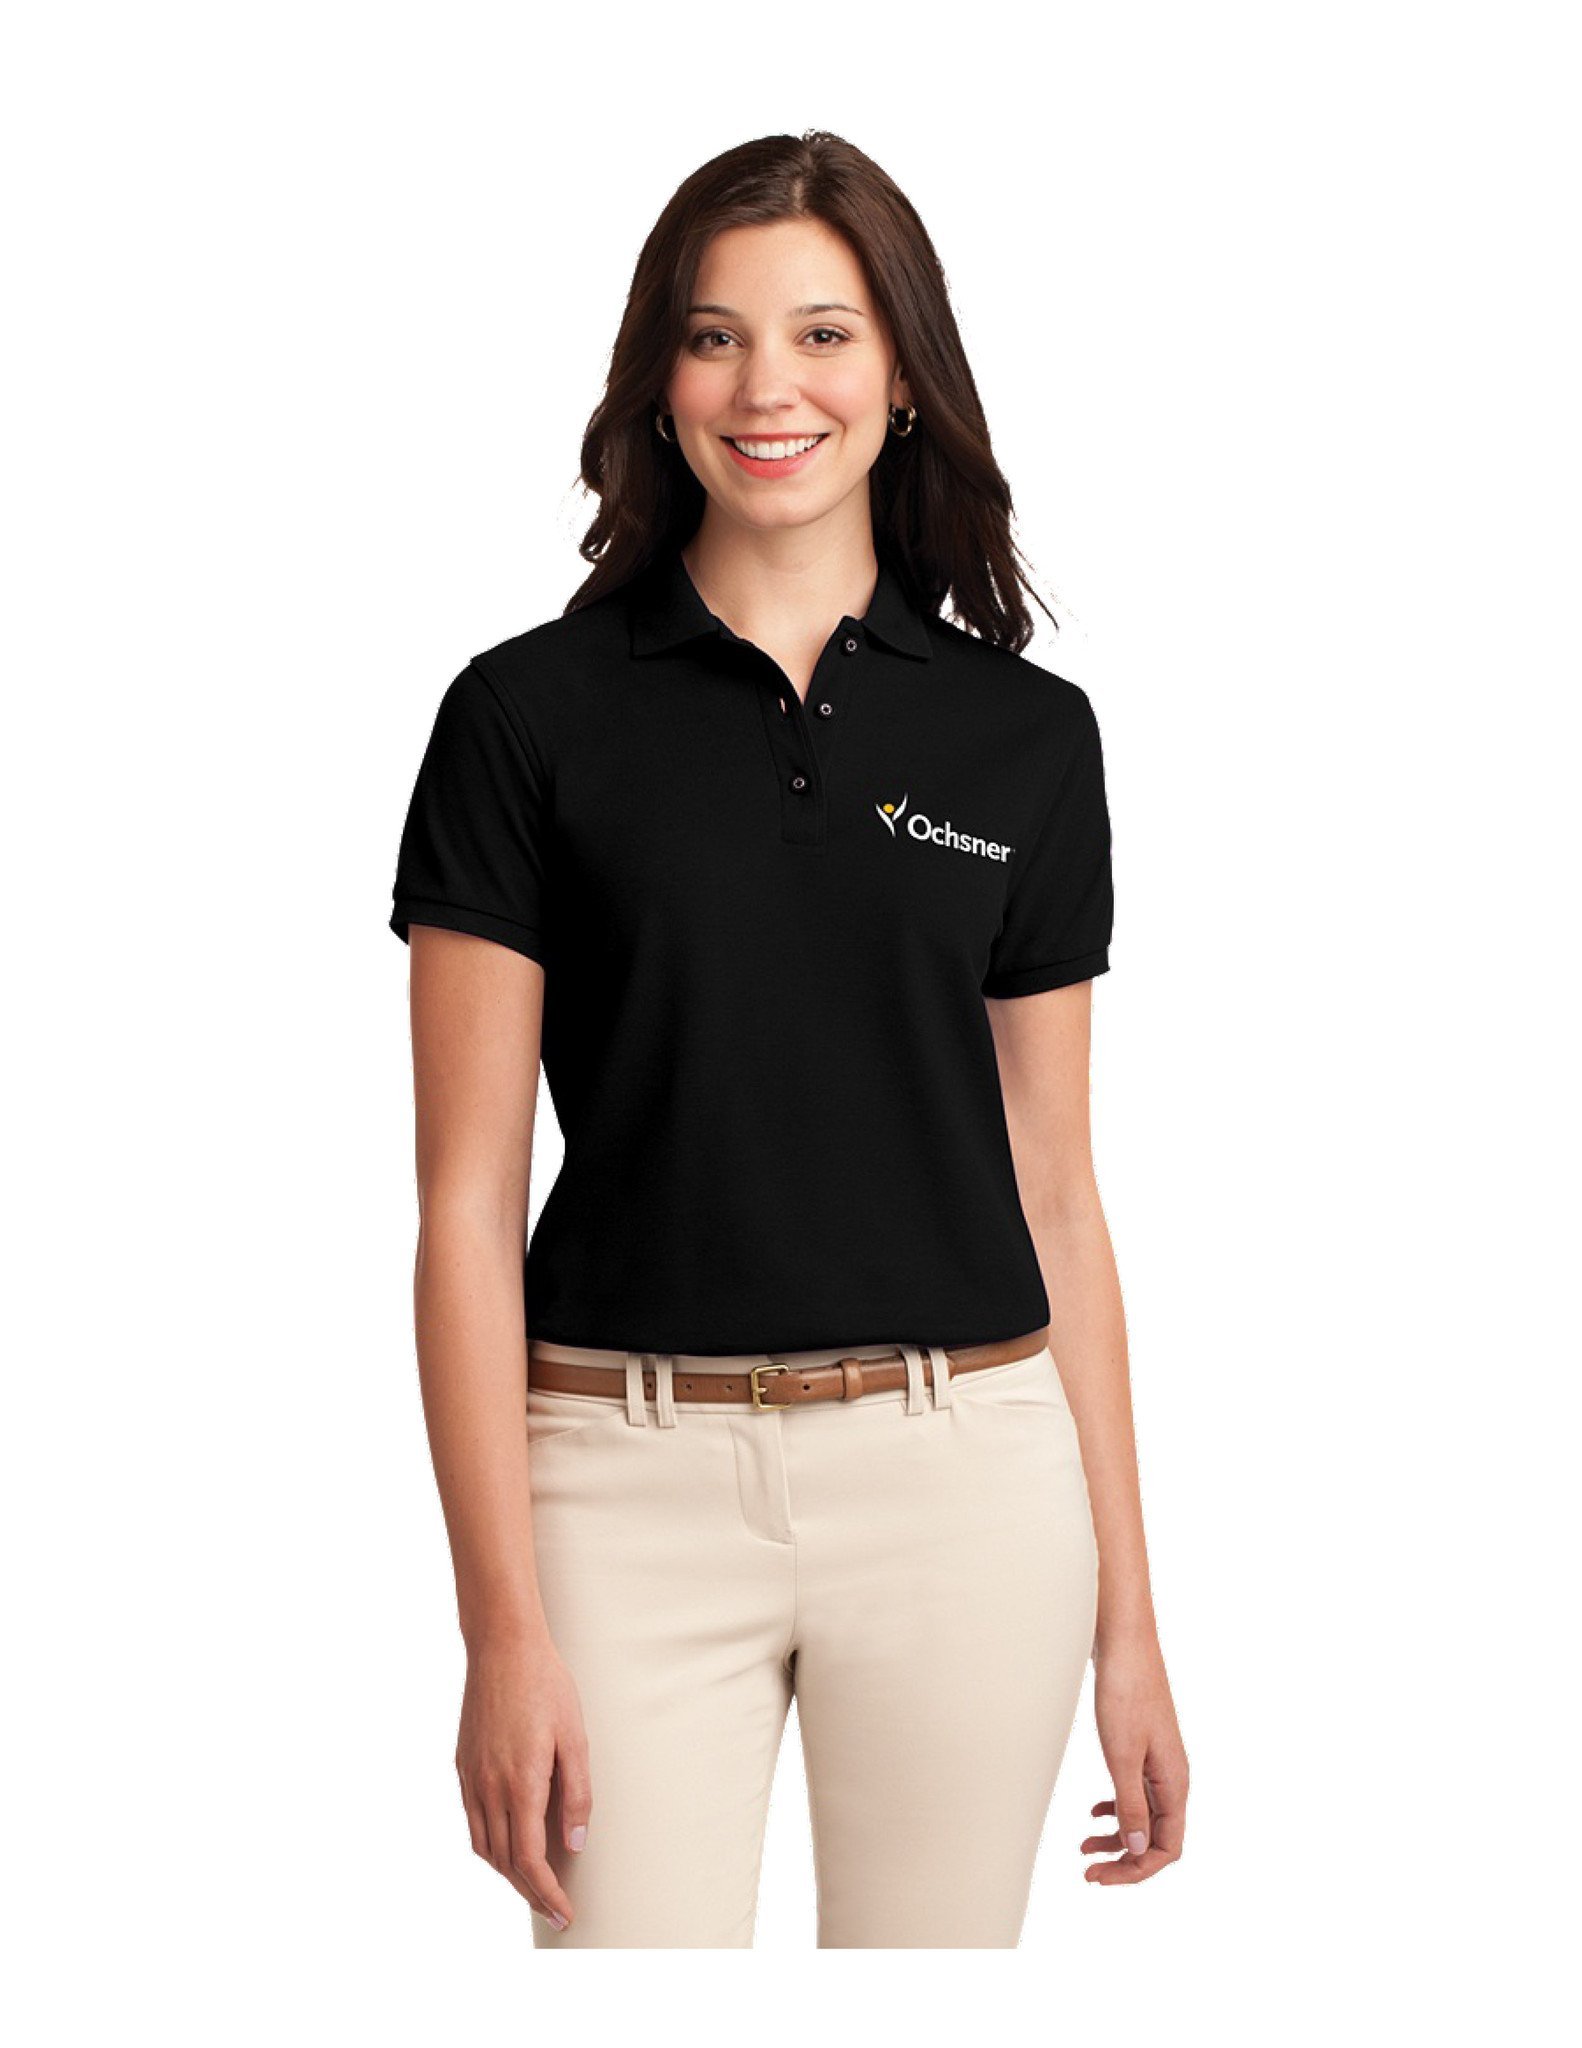 Port Authority Women's Silk Touch Polo, Black, large image number 1